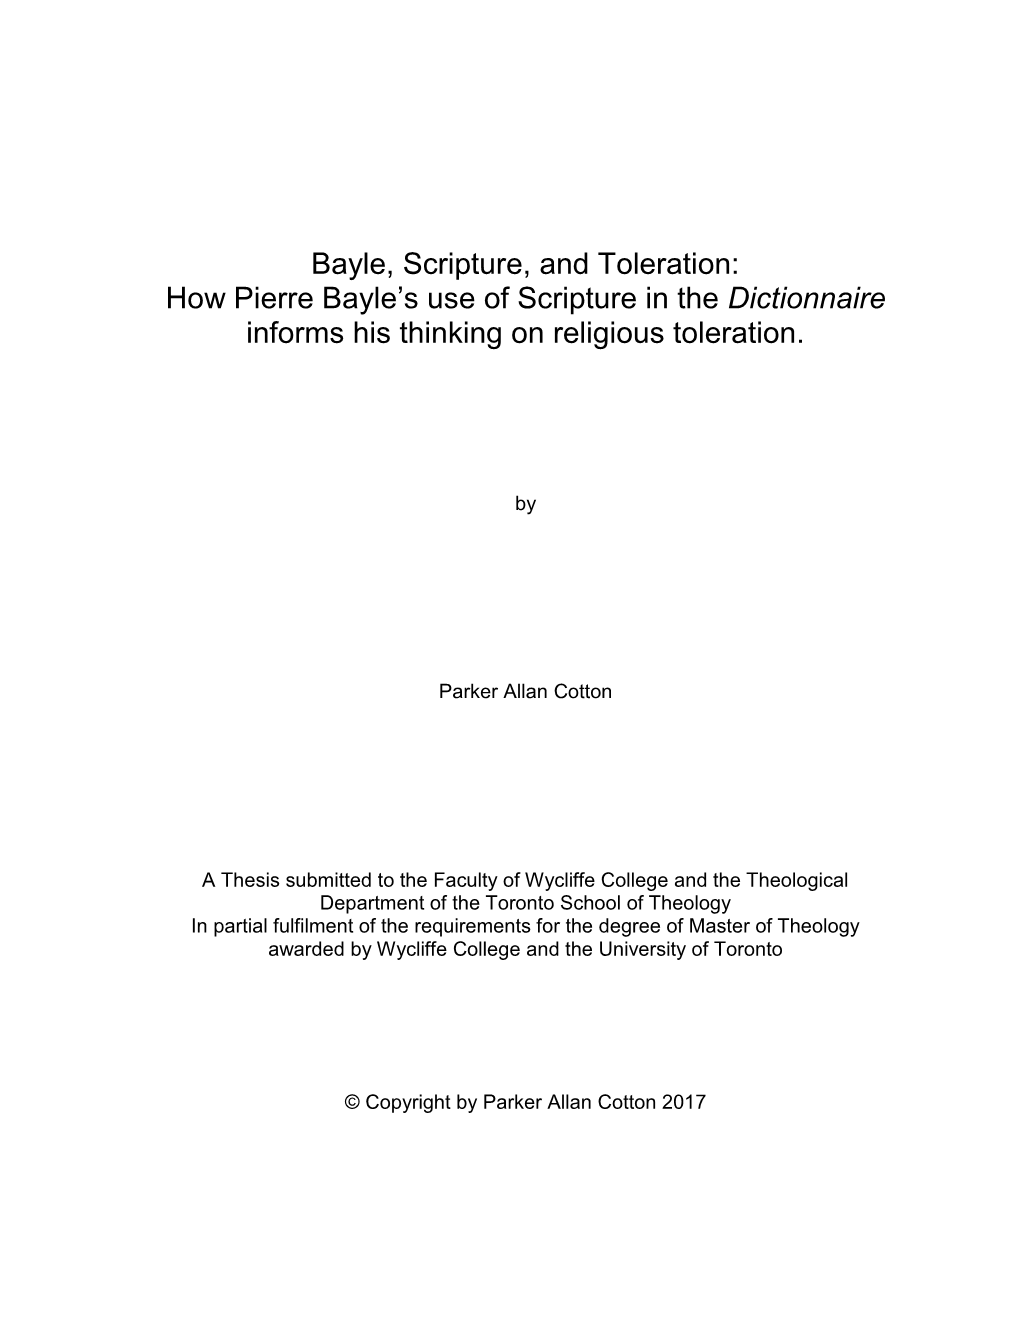 Bayle, Scripture, and Toleration: How Pierre Bayle’S Use of Scripture in the Dictionnaire Informs His Thinking on Religious Toleration